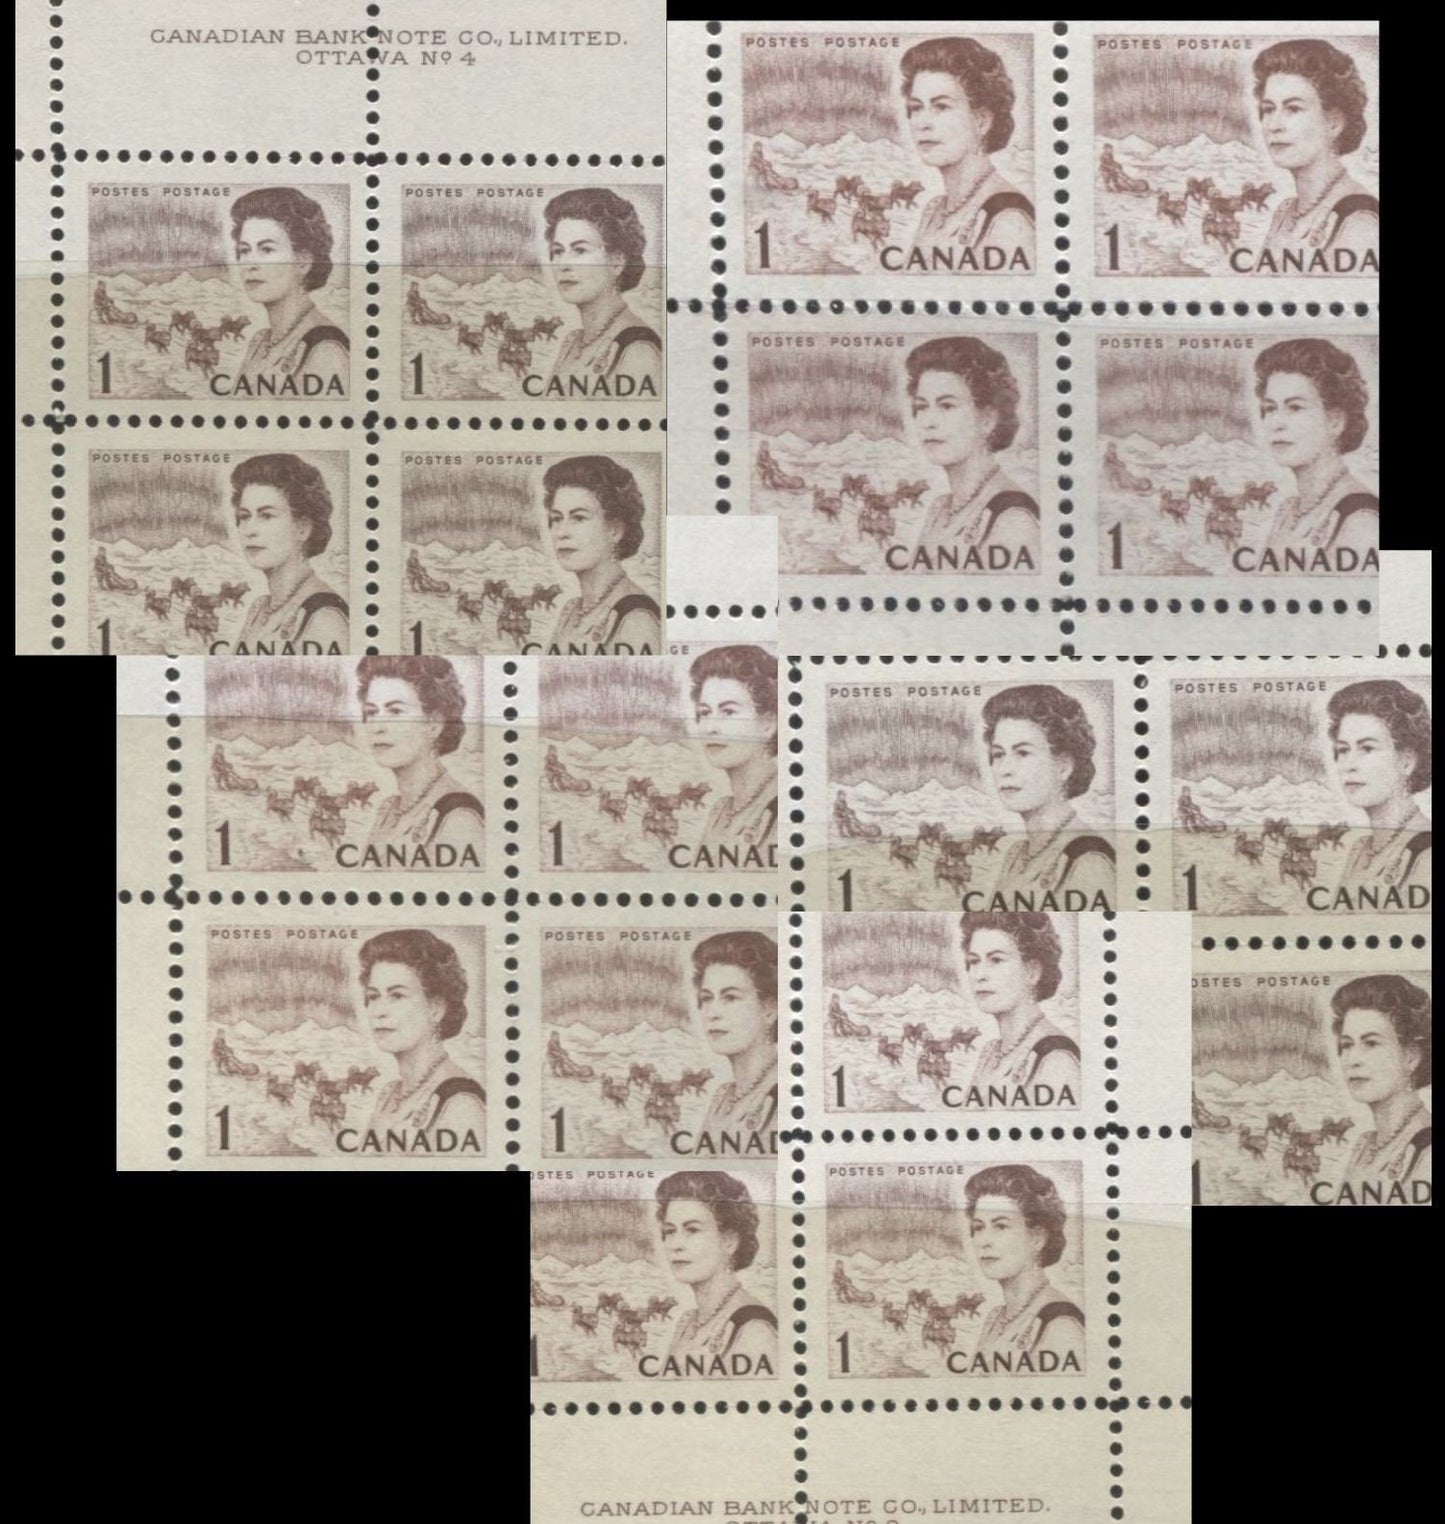 Lot #17 Canada #454, 454ii, 453iii 1c Brown & Reddish Brown, Northern Lights and Dogsled Team, 1967-1973 Centennial Issue, A Group of 4 VF Used Private Perfins